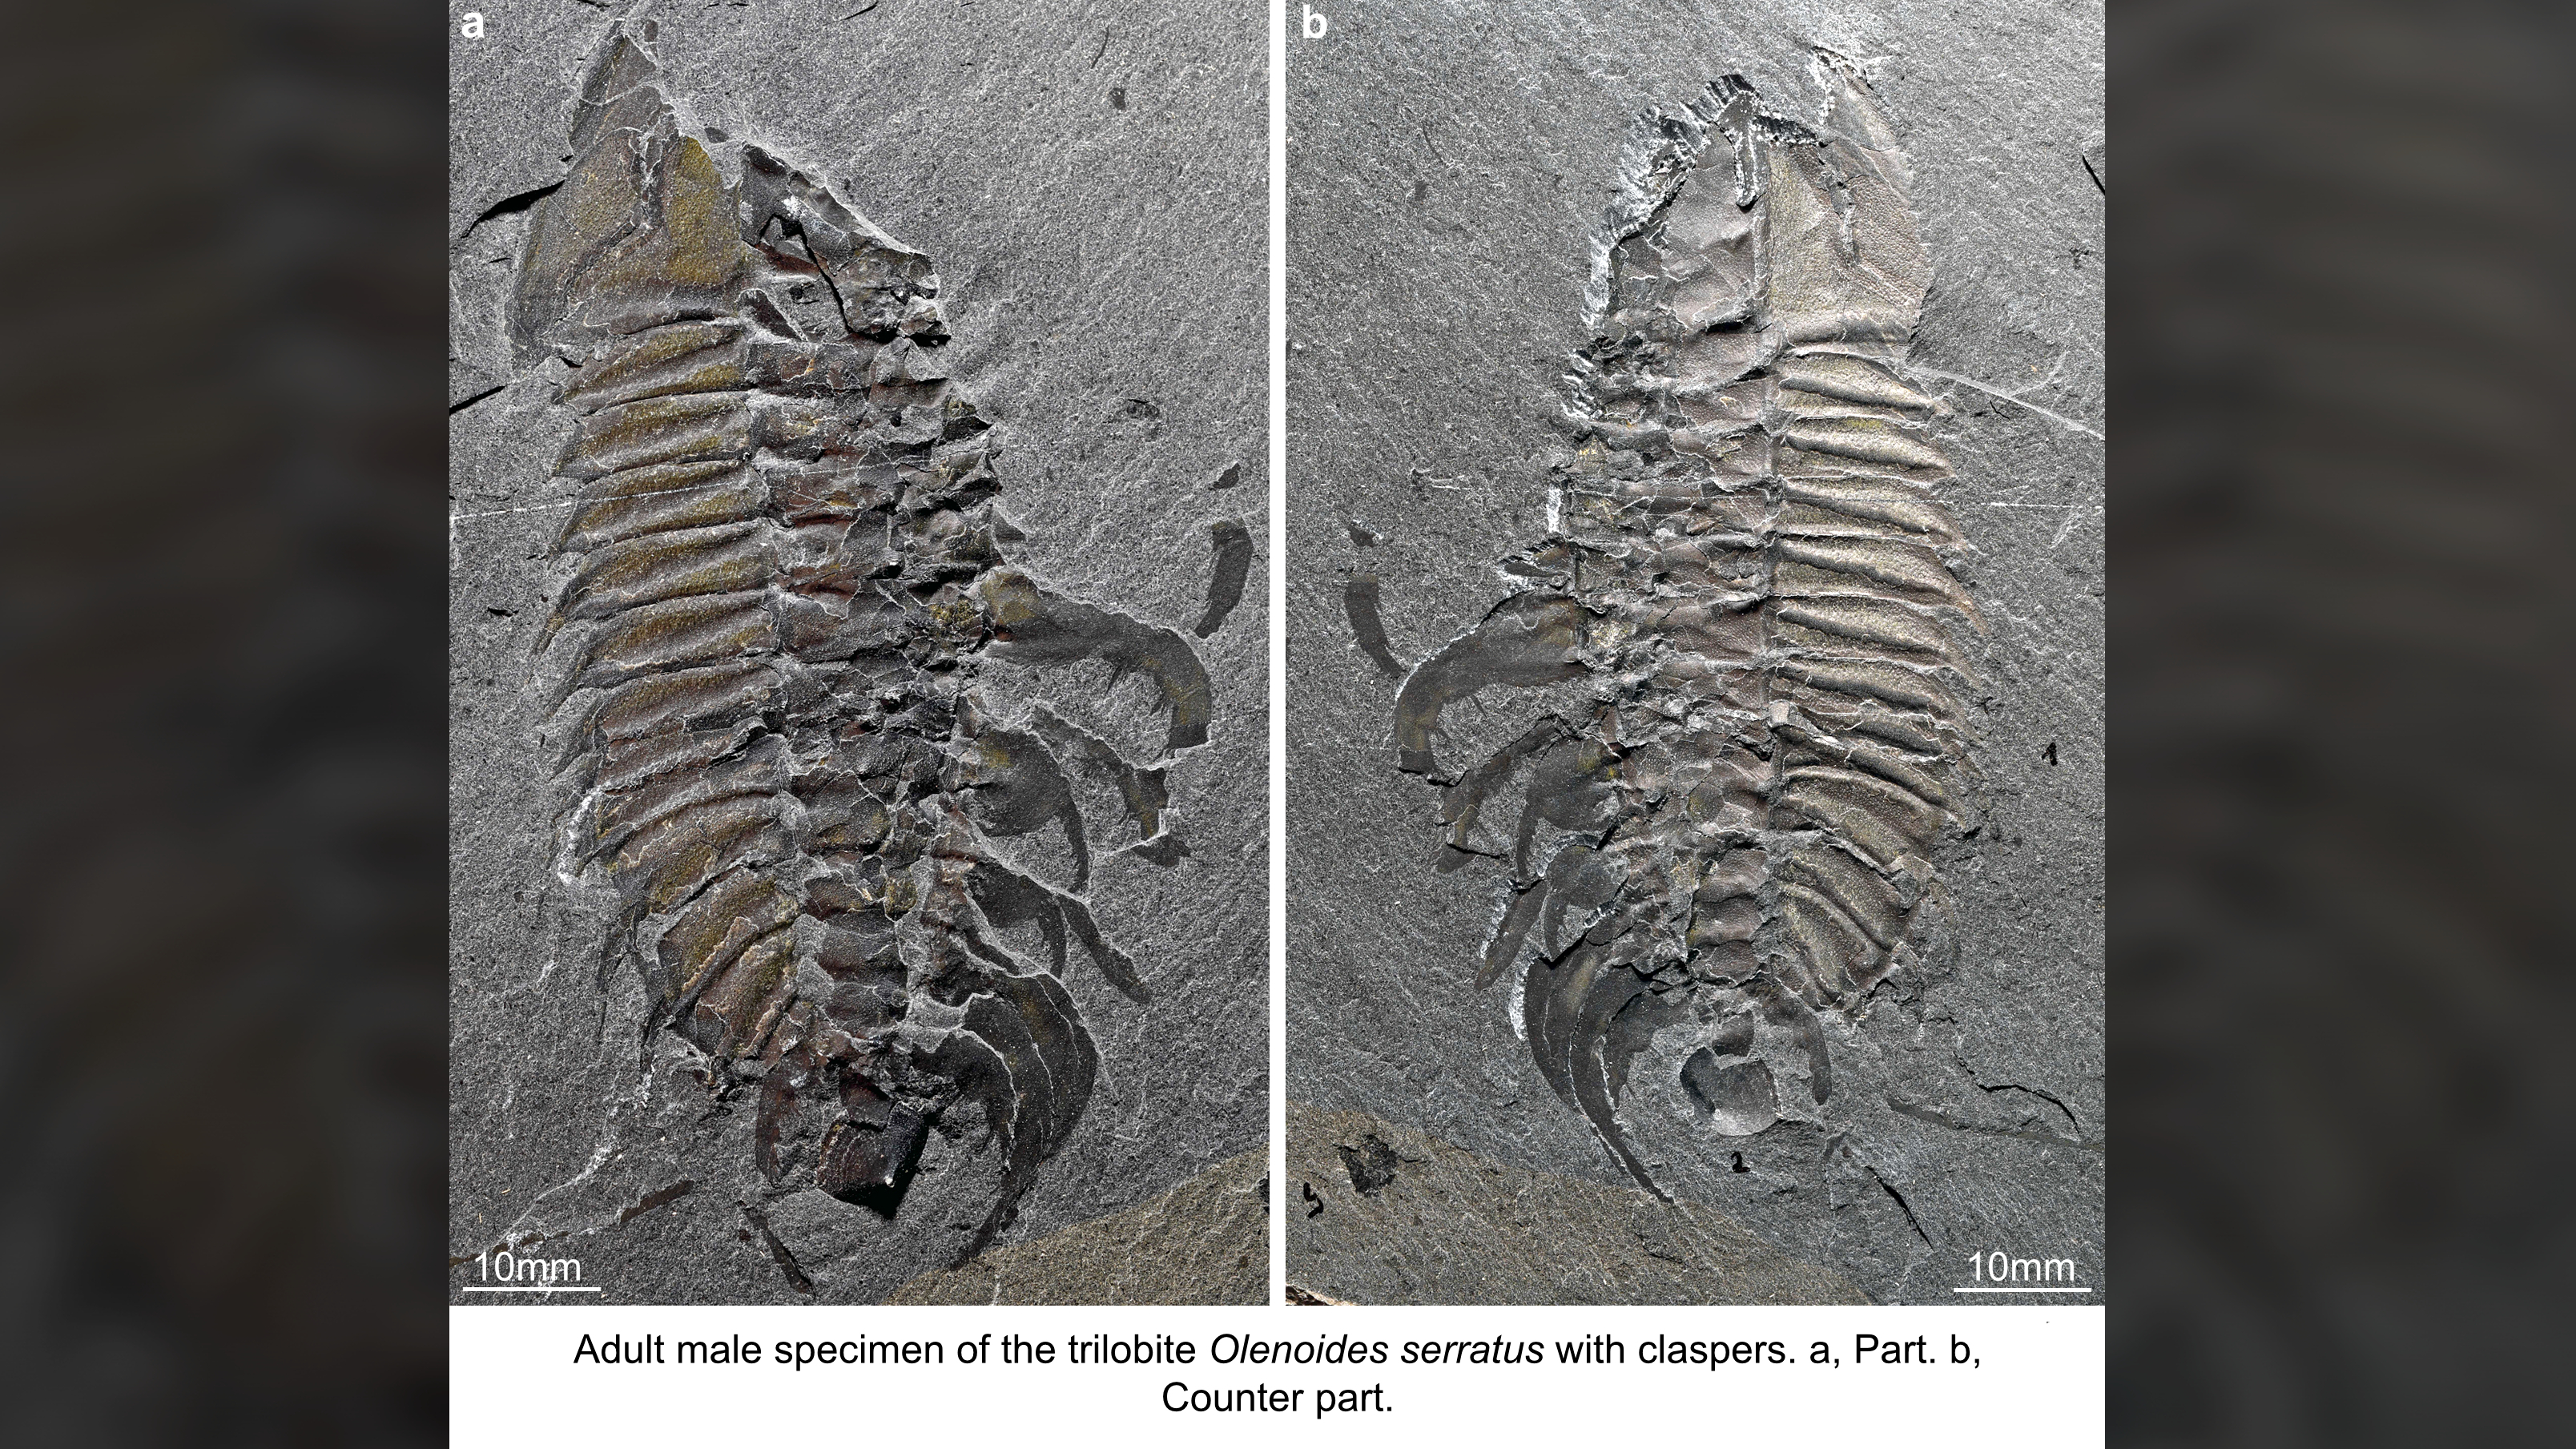 The adult male specimen of the trilobite Olenoides serratus with claspers, showing the part (left) and counterpart (right) of the fossil.